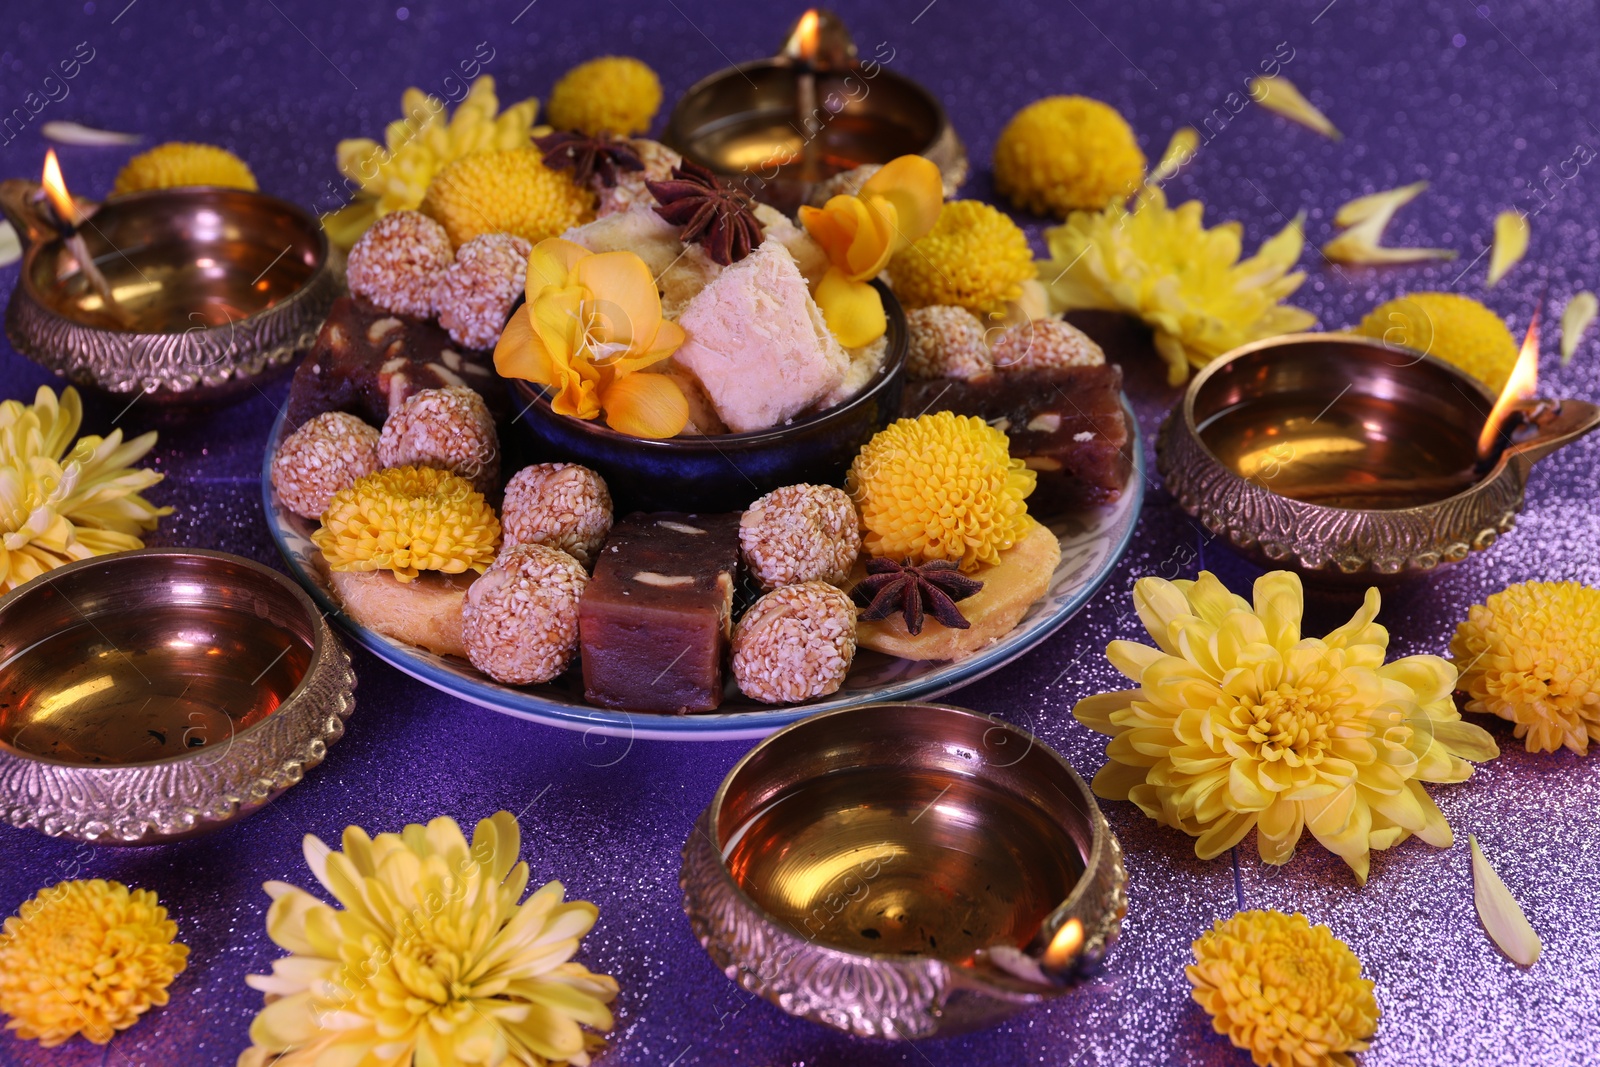 Photo of Diwali celebration. Diya lamps, tasty Indian sweets and chrysanthemum flowers on shiny violet table